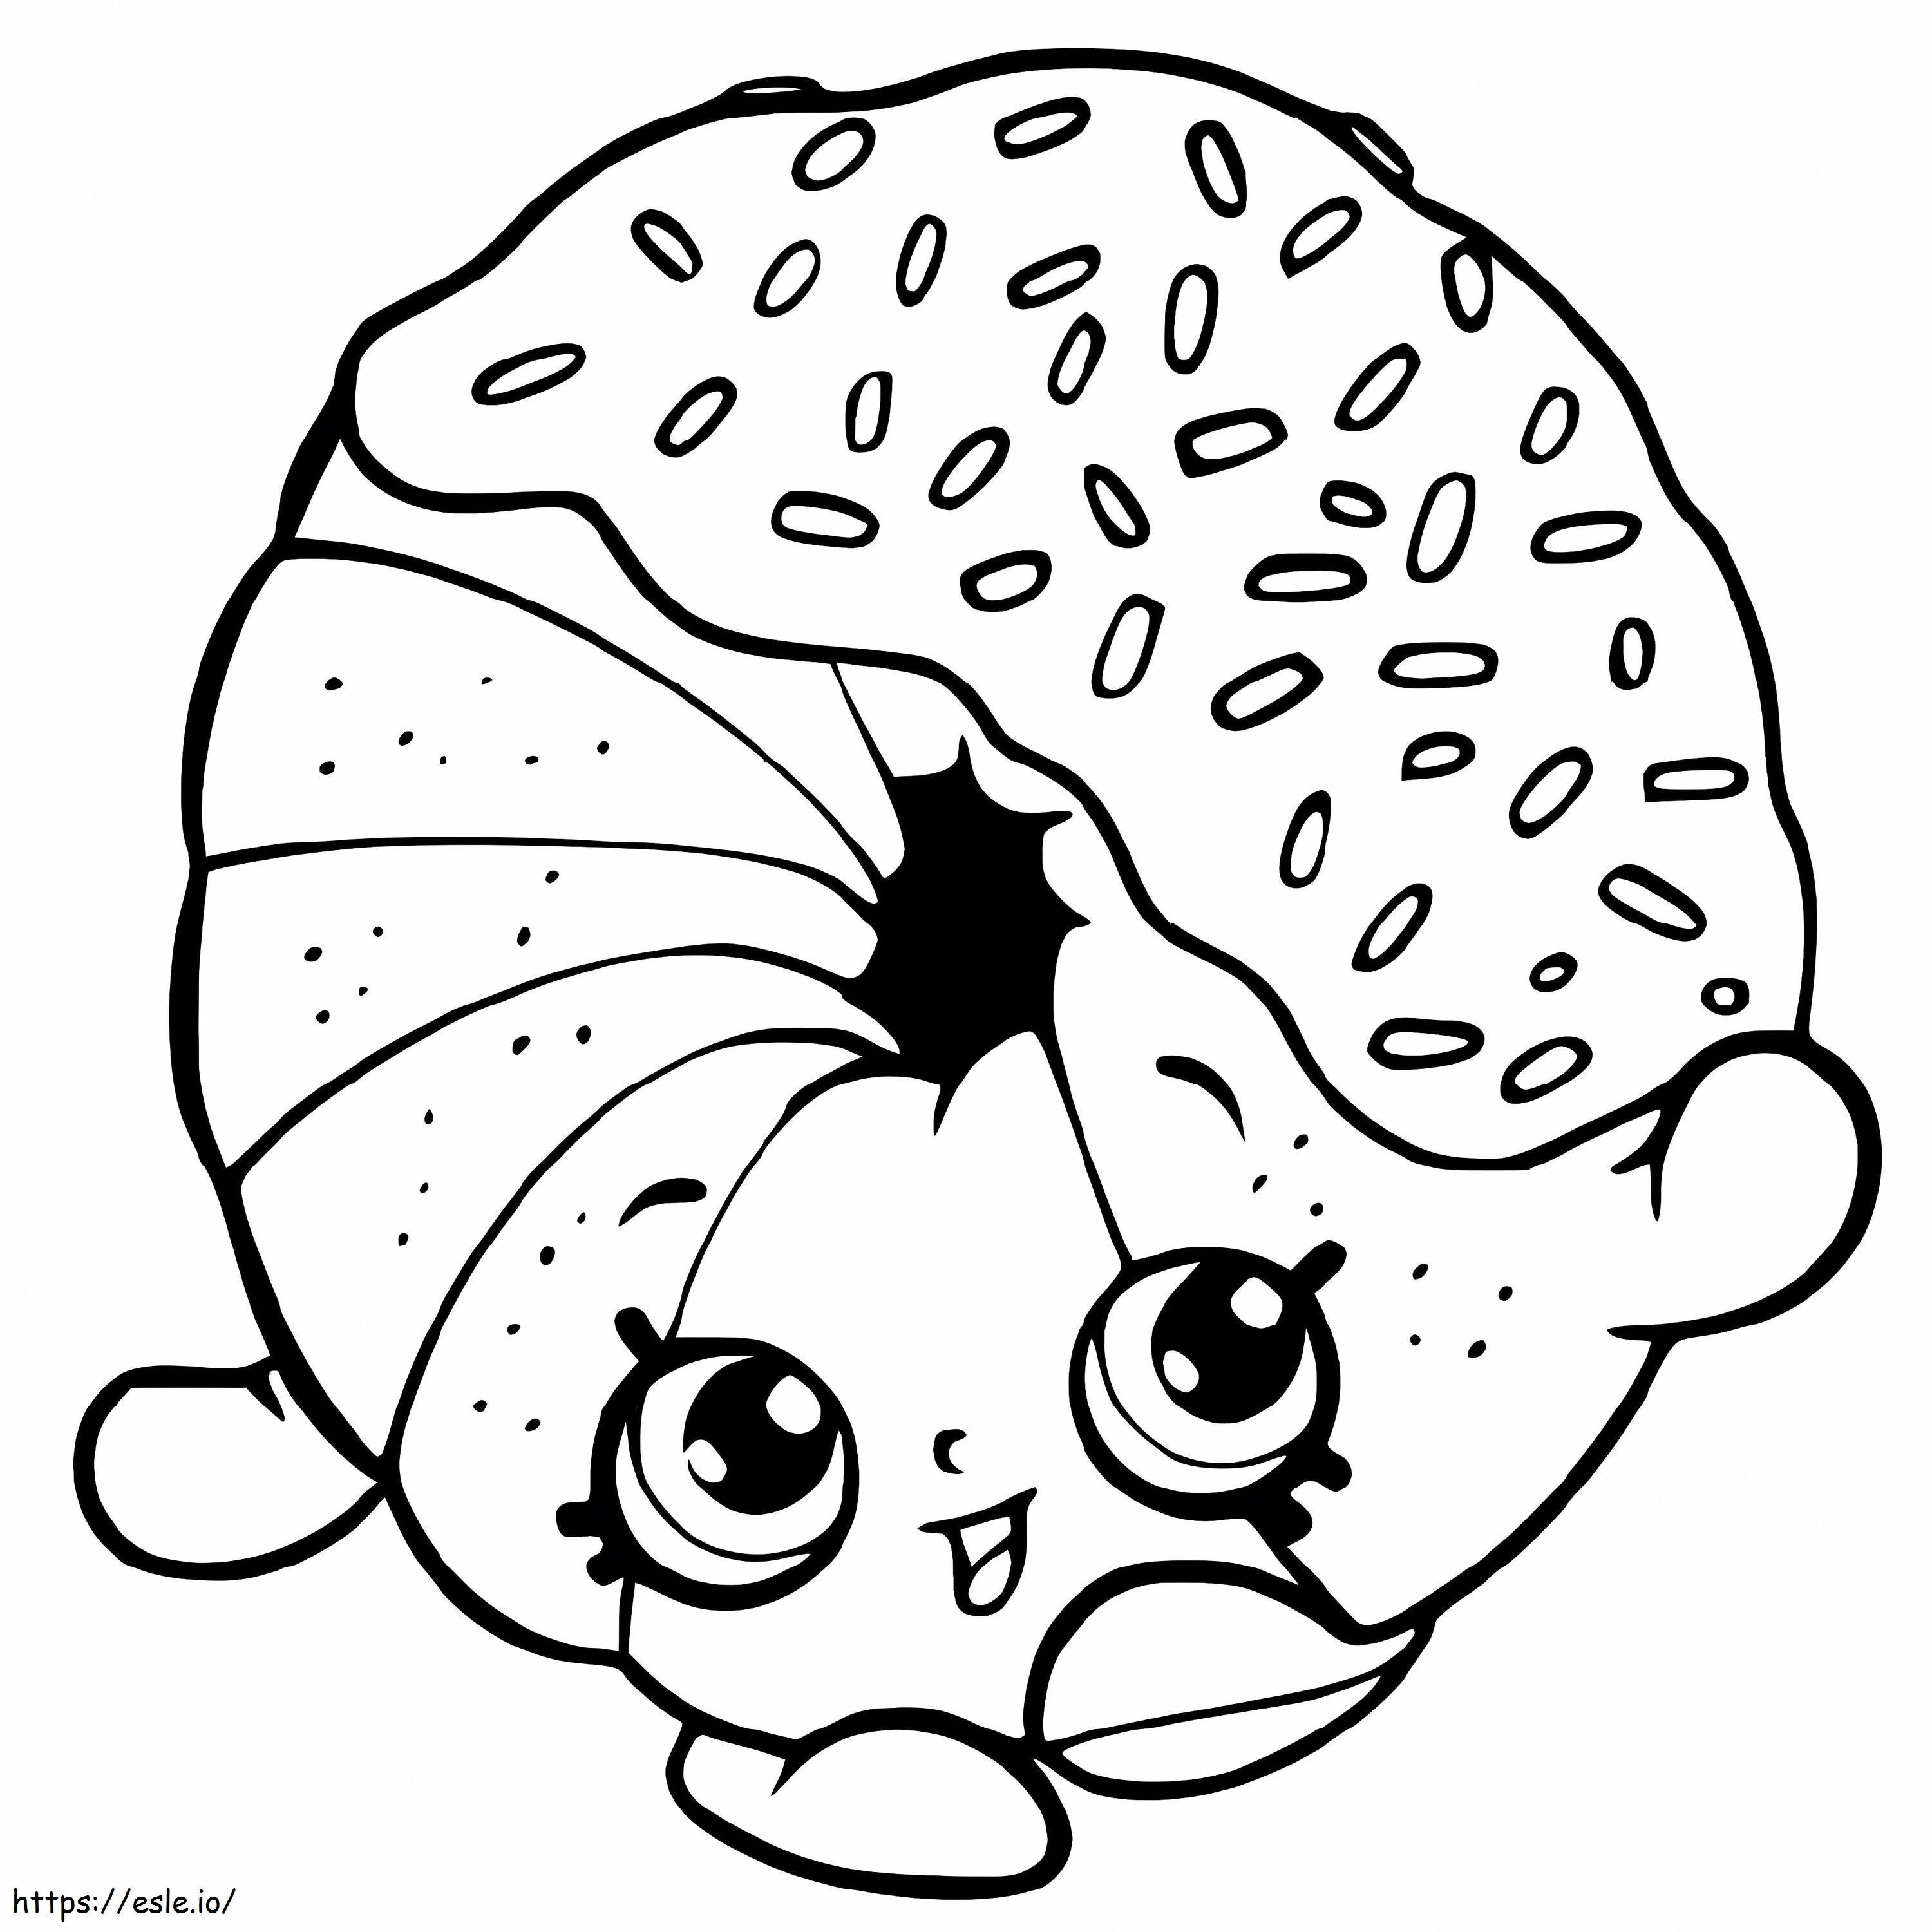 Dippy Donut Shopkin coloring page